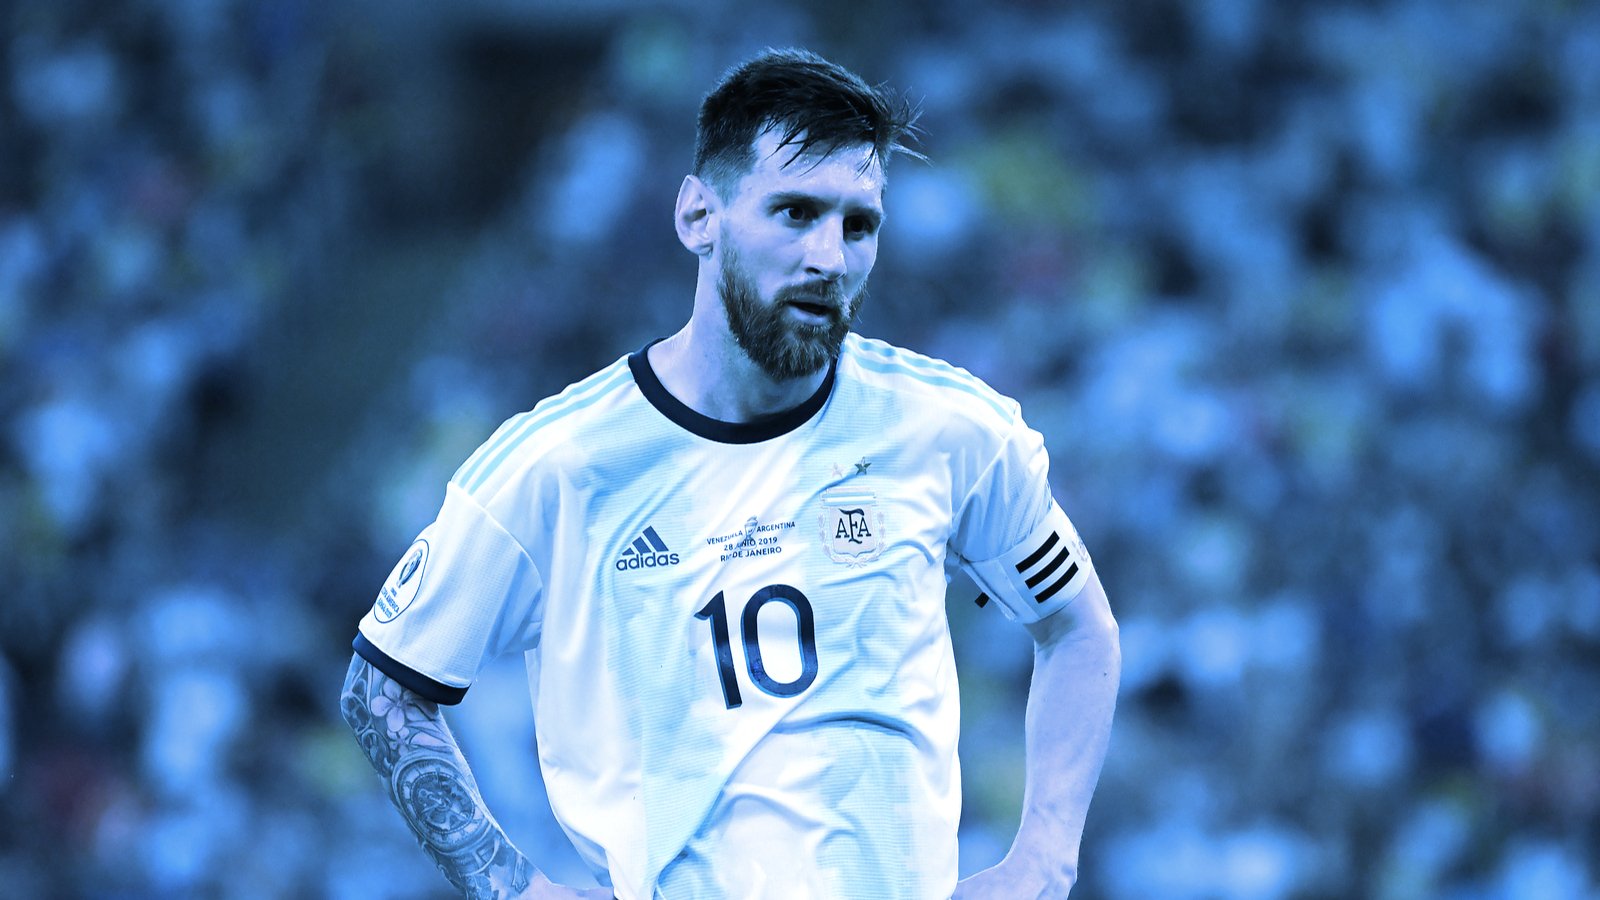 Lionel Messi is arguably the greatest soccer player the sport has ever seen. Image: Shutterstock